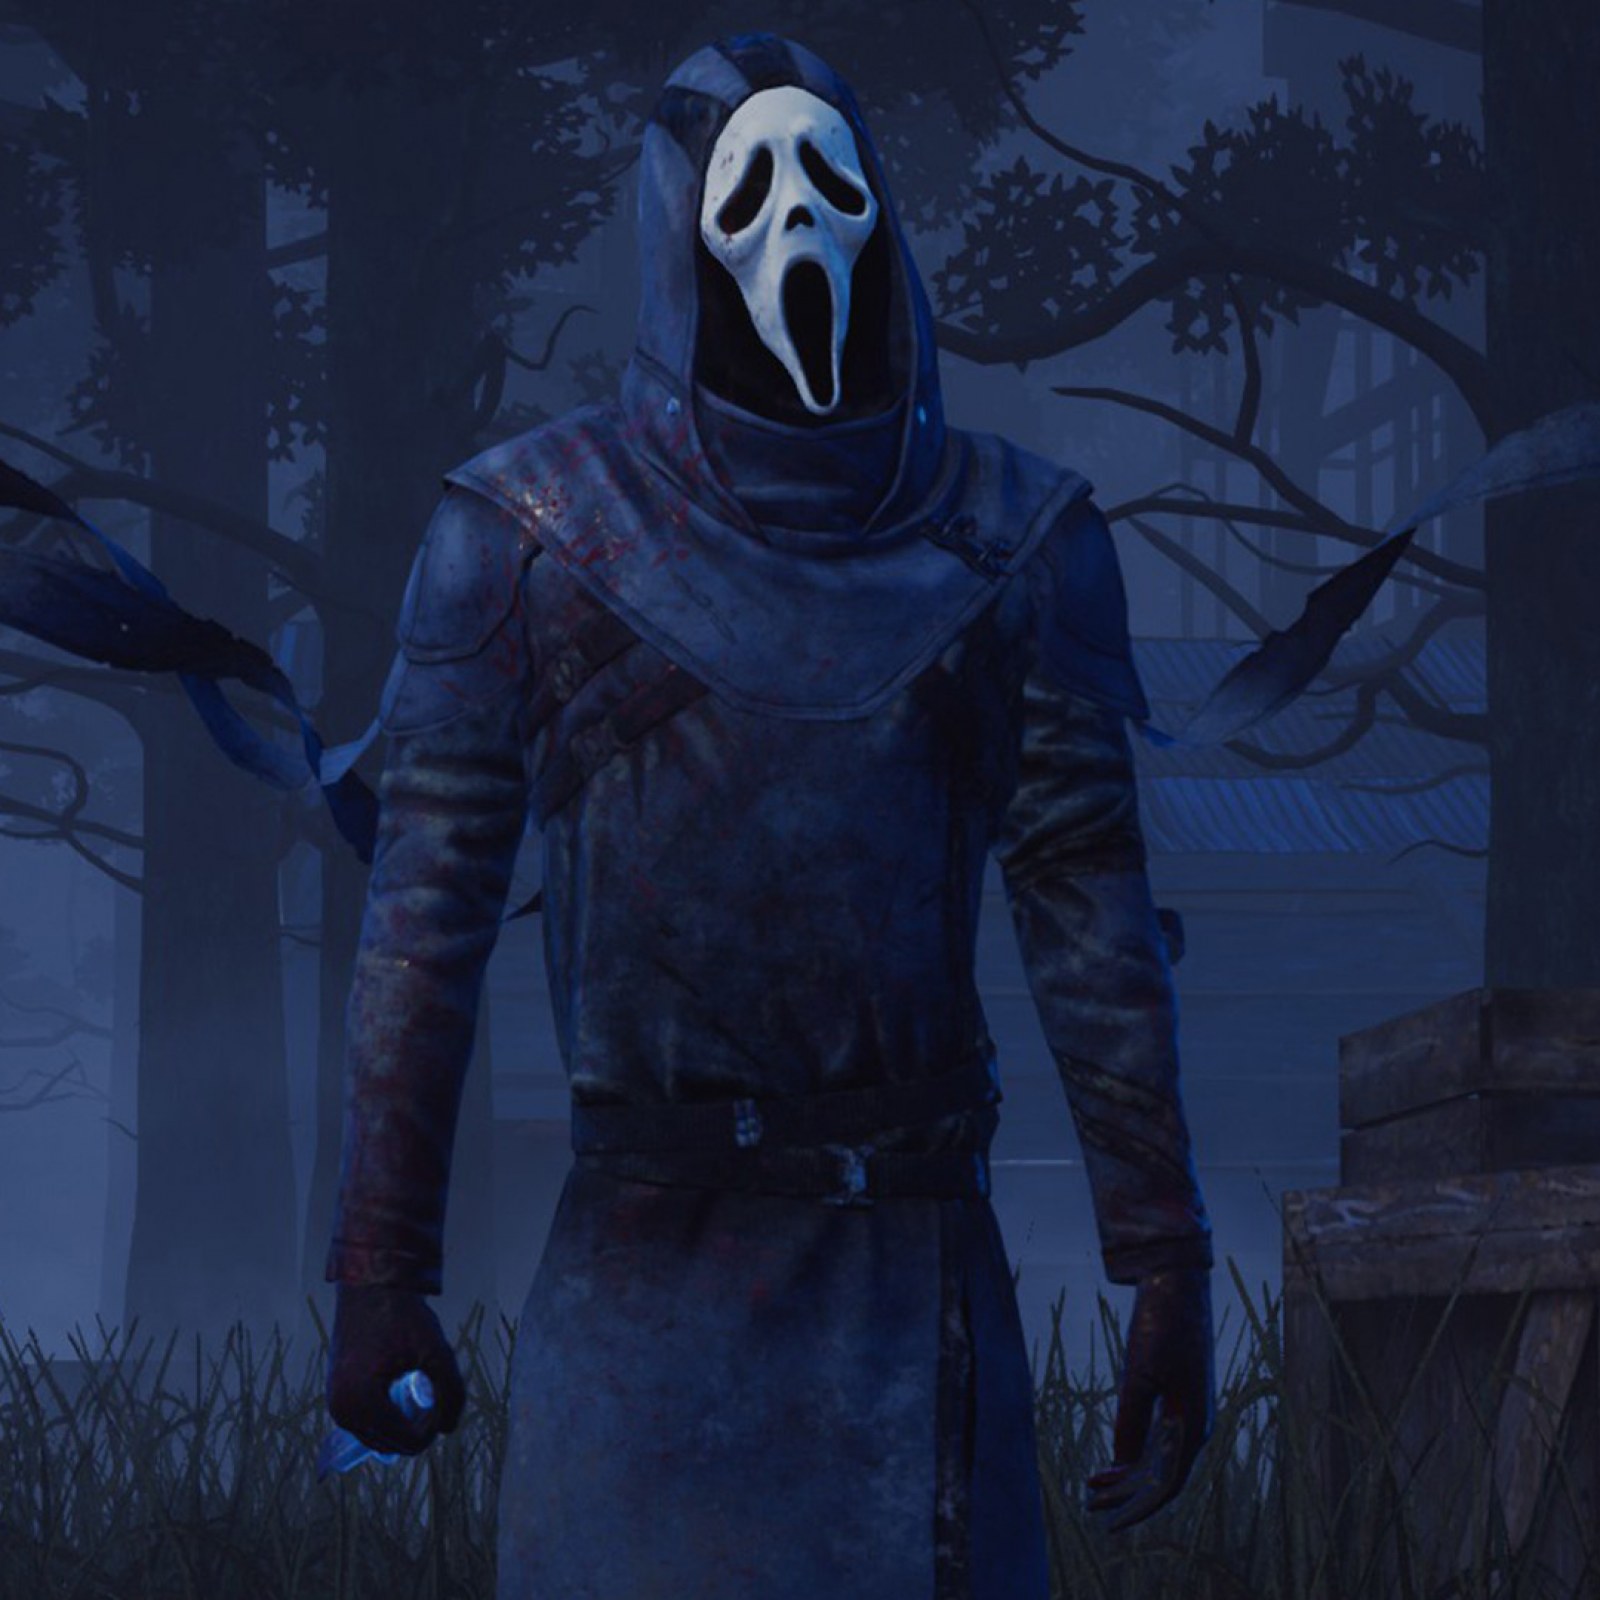 Dead By Daylight Nintendo Switch Includes 9 Killers Michael Myers And The Demogorgon Downloadable